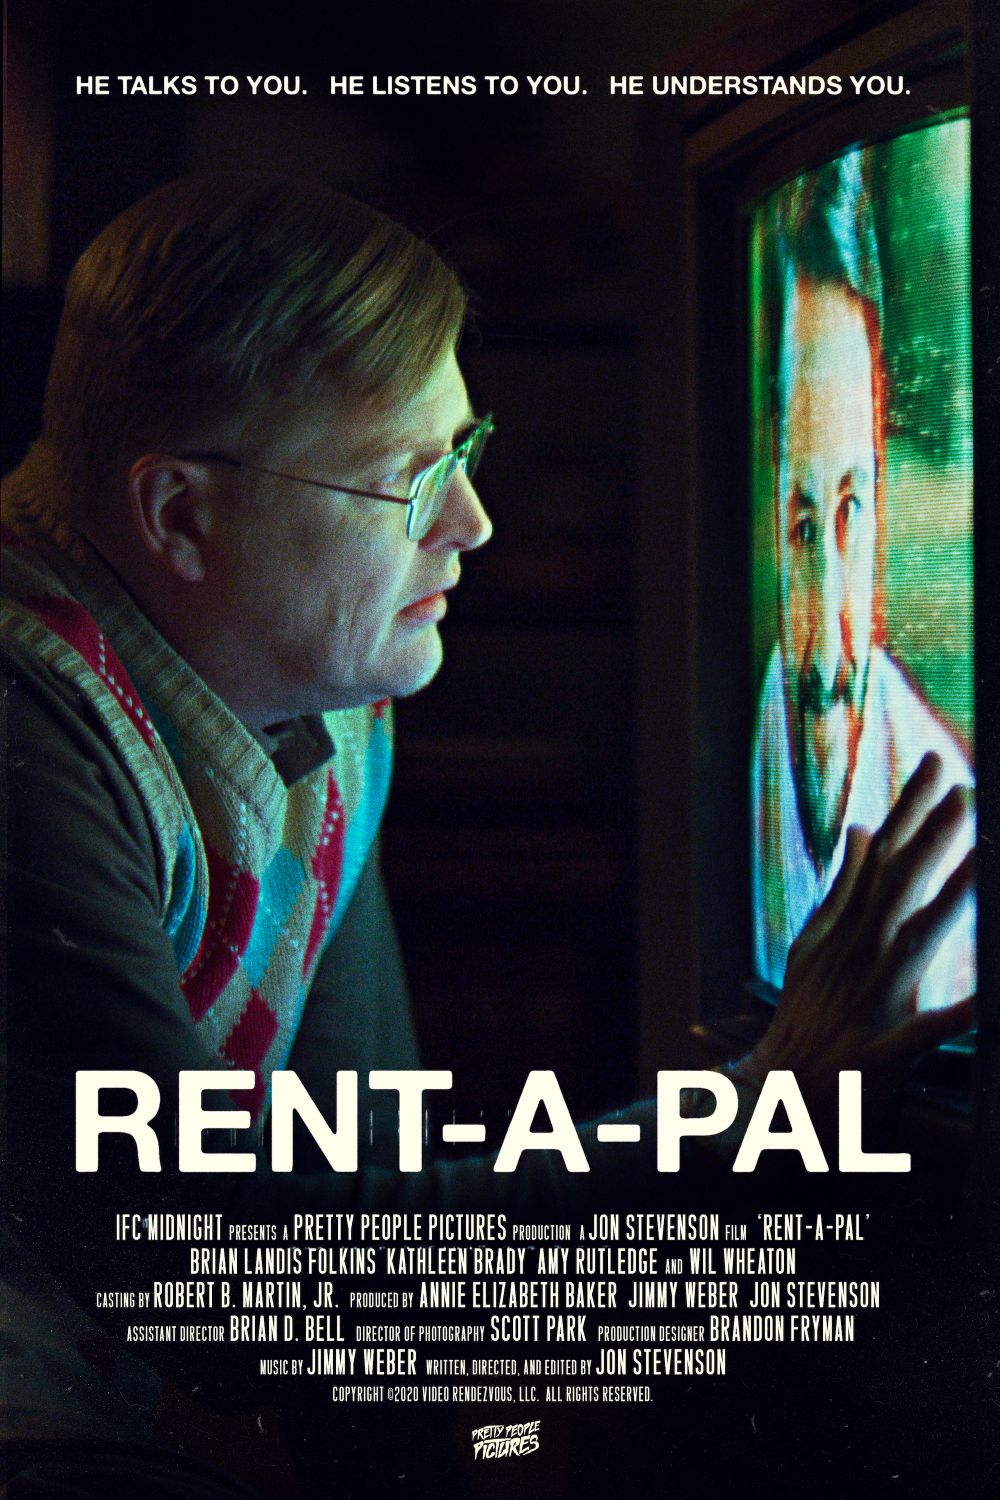 Rent-A-Pal (2020) Film Review: Movie Completionist #003